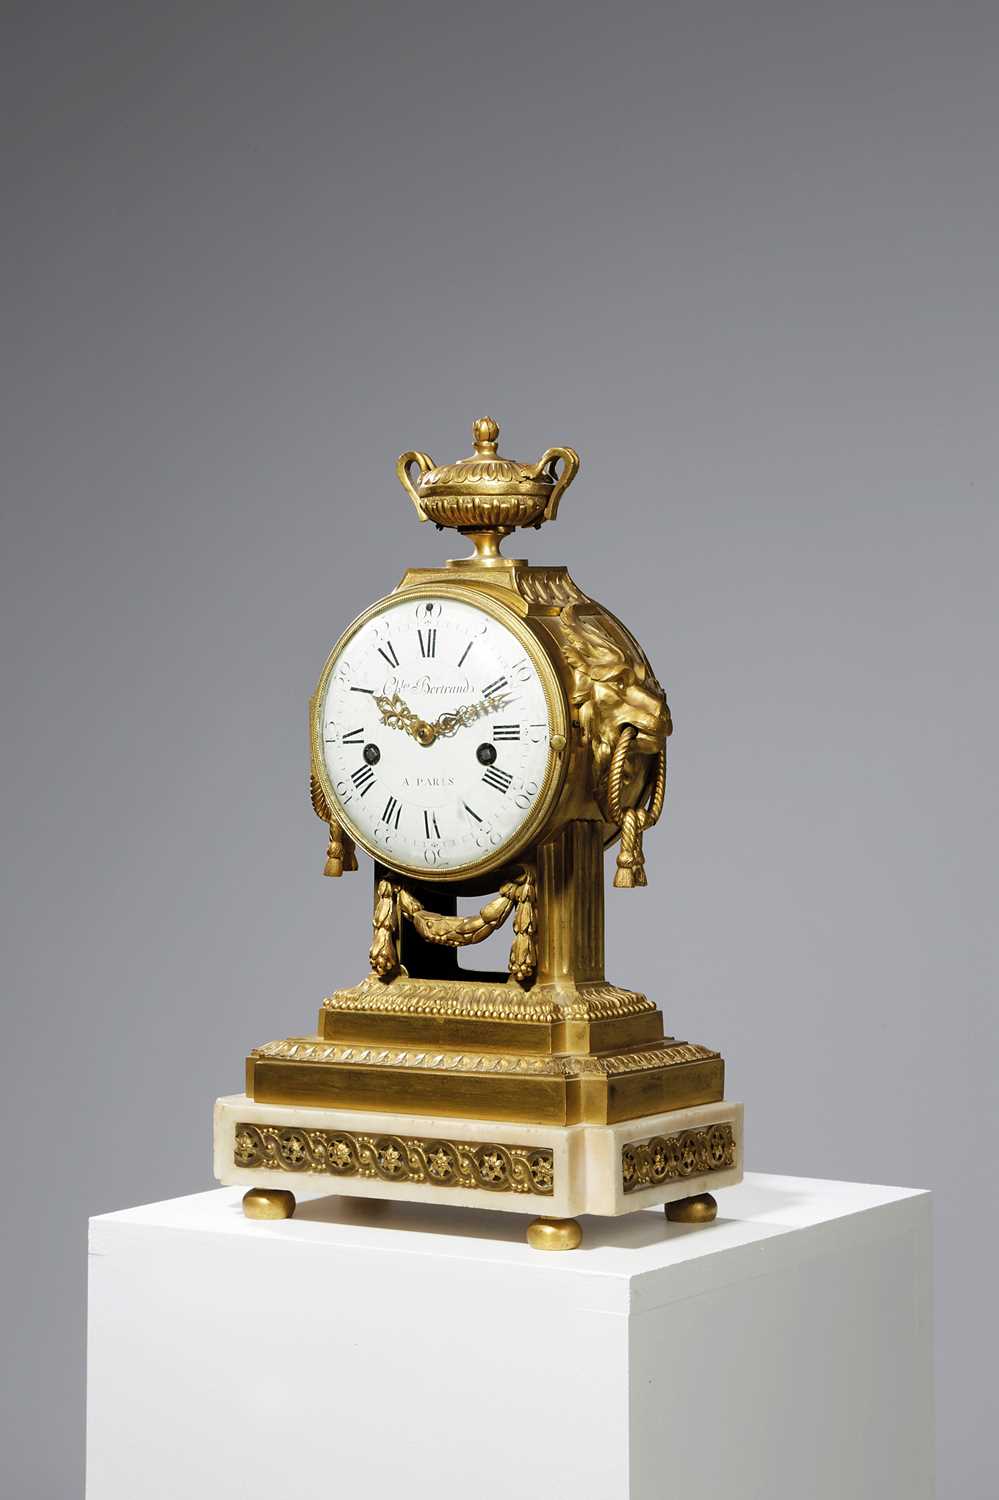 A FRENCH WHITE MARBLE AND ORMOLU MANTEL CLOCKBY CHARLES BERTRAND, PARIS, LATE 18TH CENTURYthe - Image 2 of 2